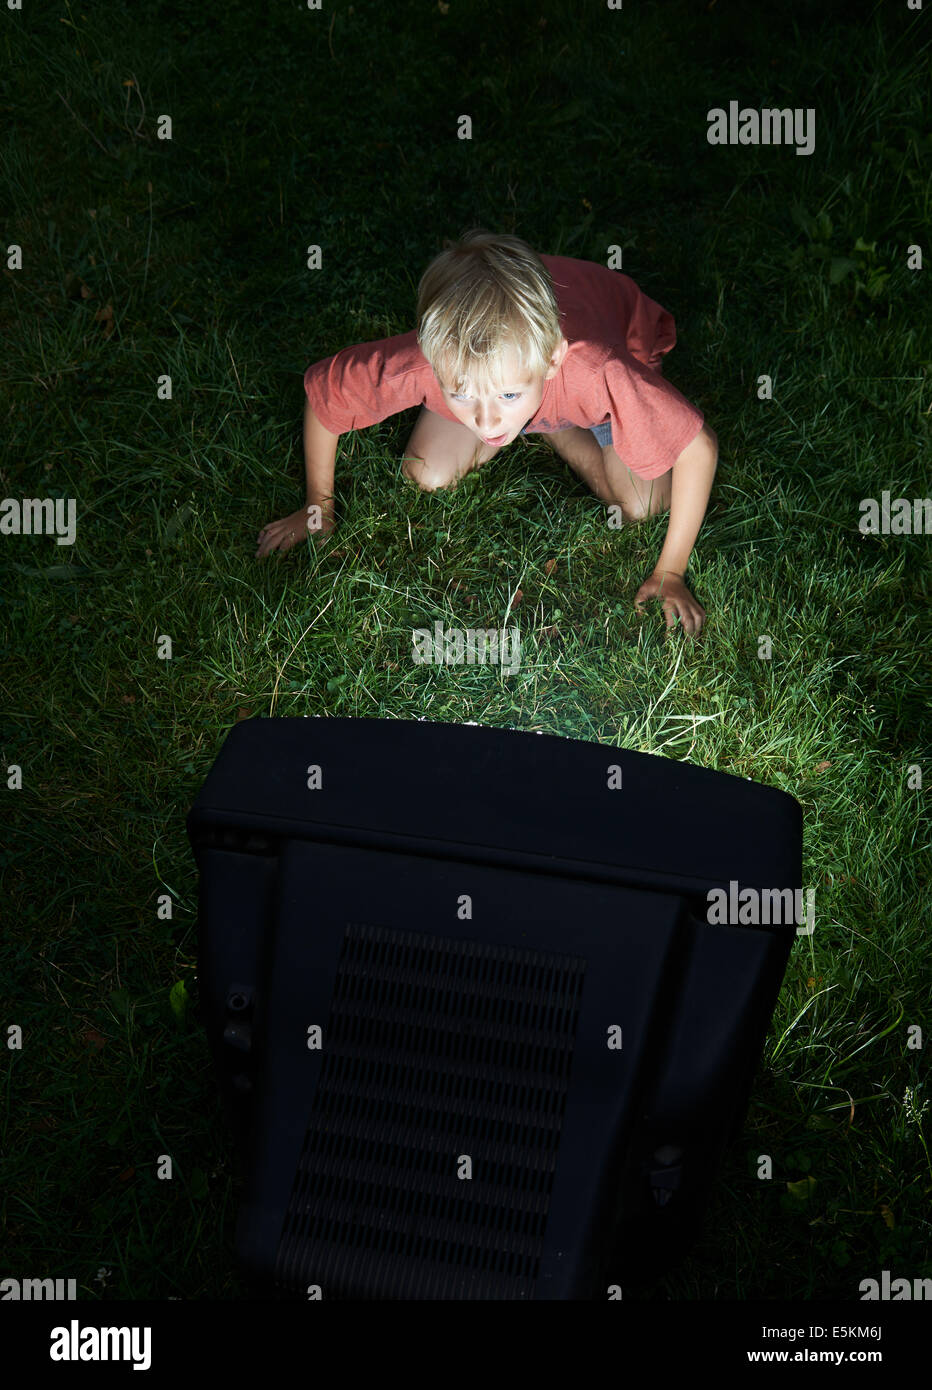 Child Blond Boy Watching Television in Yard, outside in green grass lawn, emotional, facial expression, grimace, grinning Stock Photo